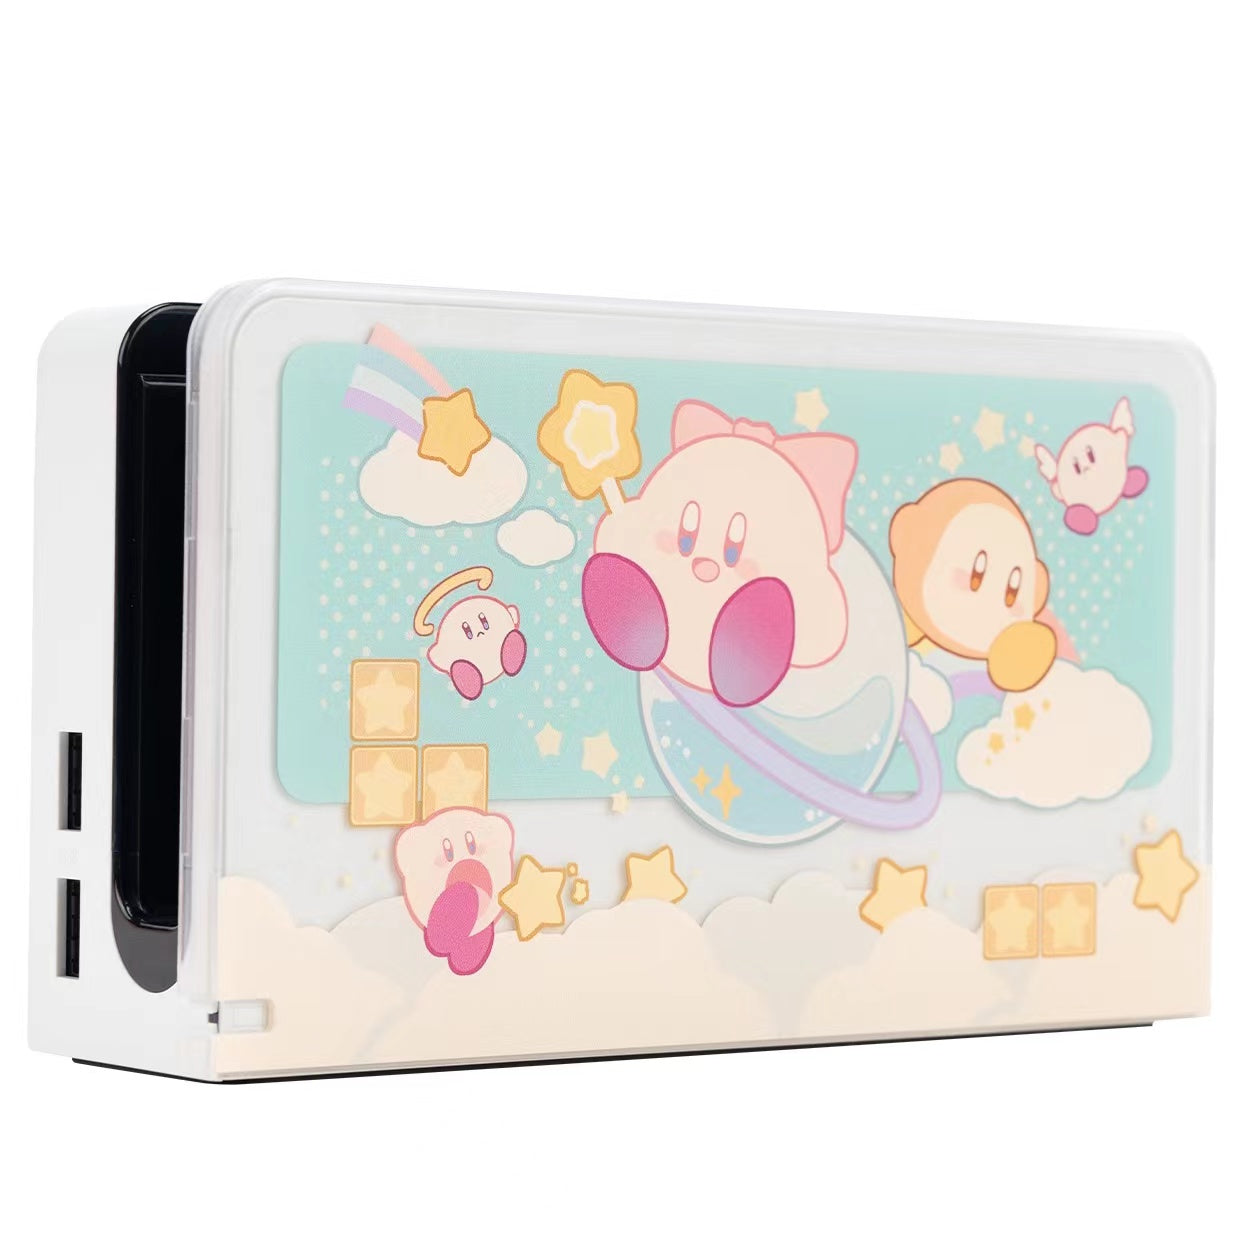 BlingKiyo Kirby Nintendo Switch Accessories Series/Game Card Case/Dust Cover